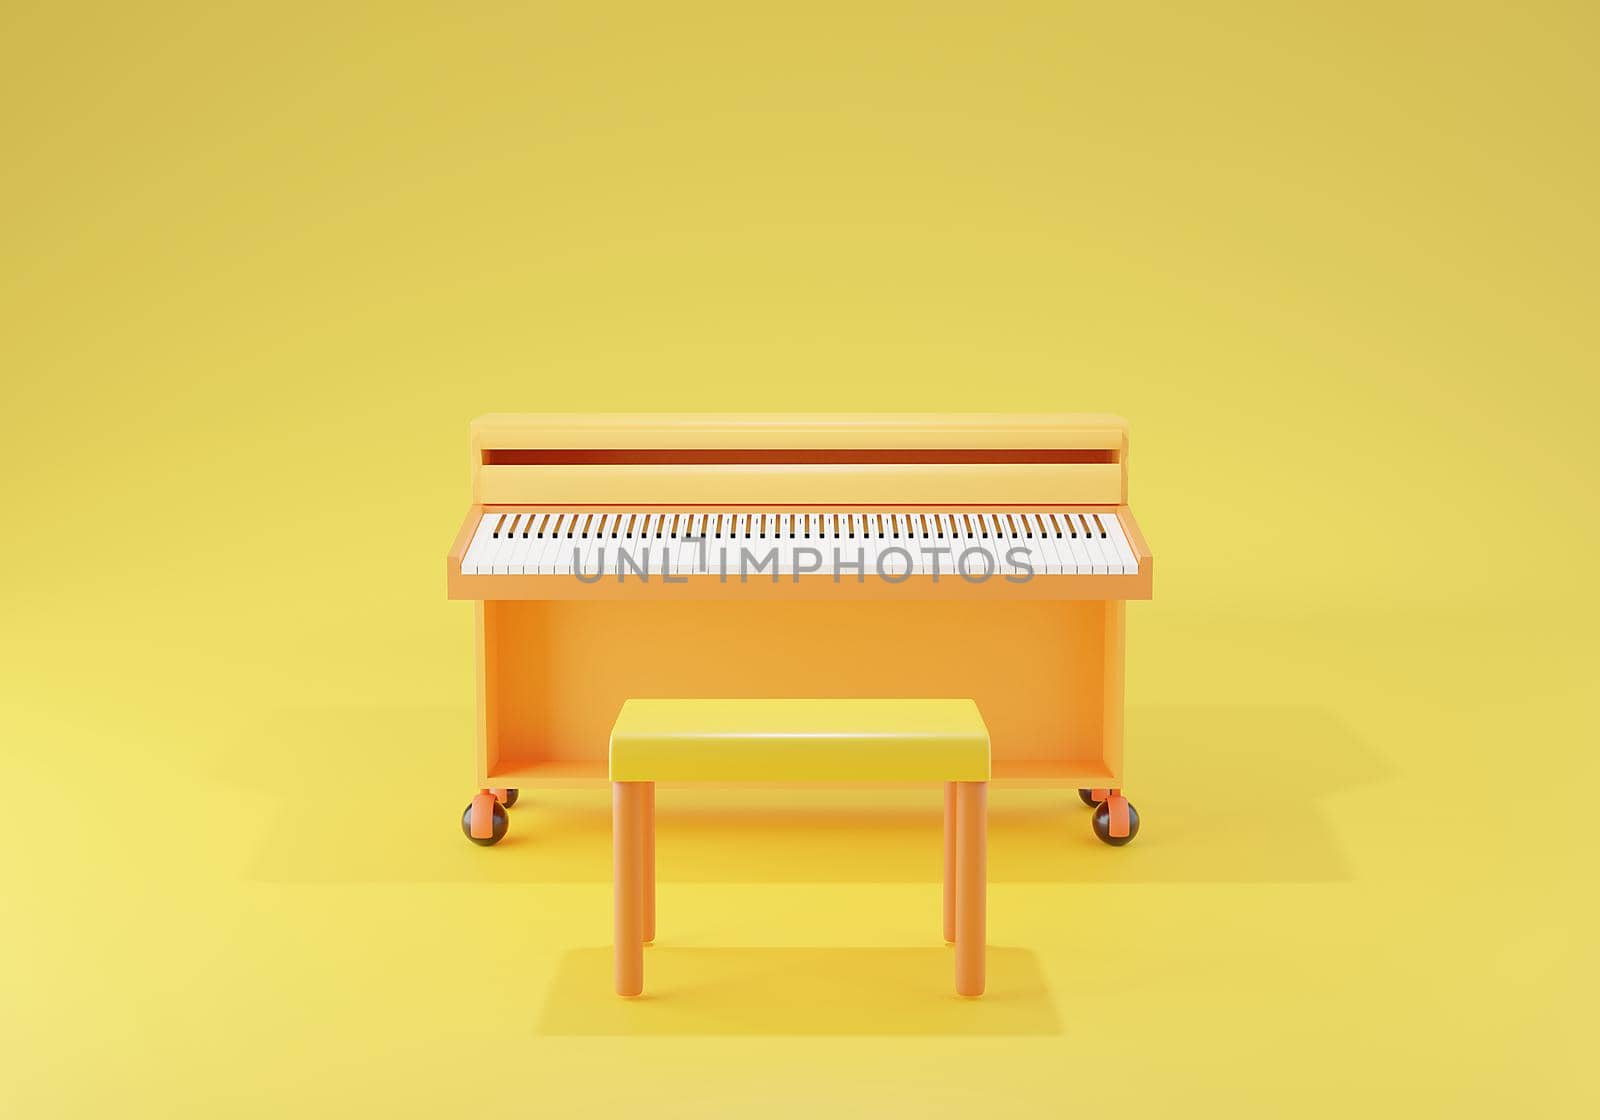 The 3D rendering piano colorful with a yellow chair on the yellow background, Live music play concert concept by yodsawai